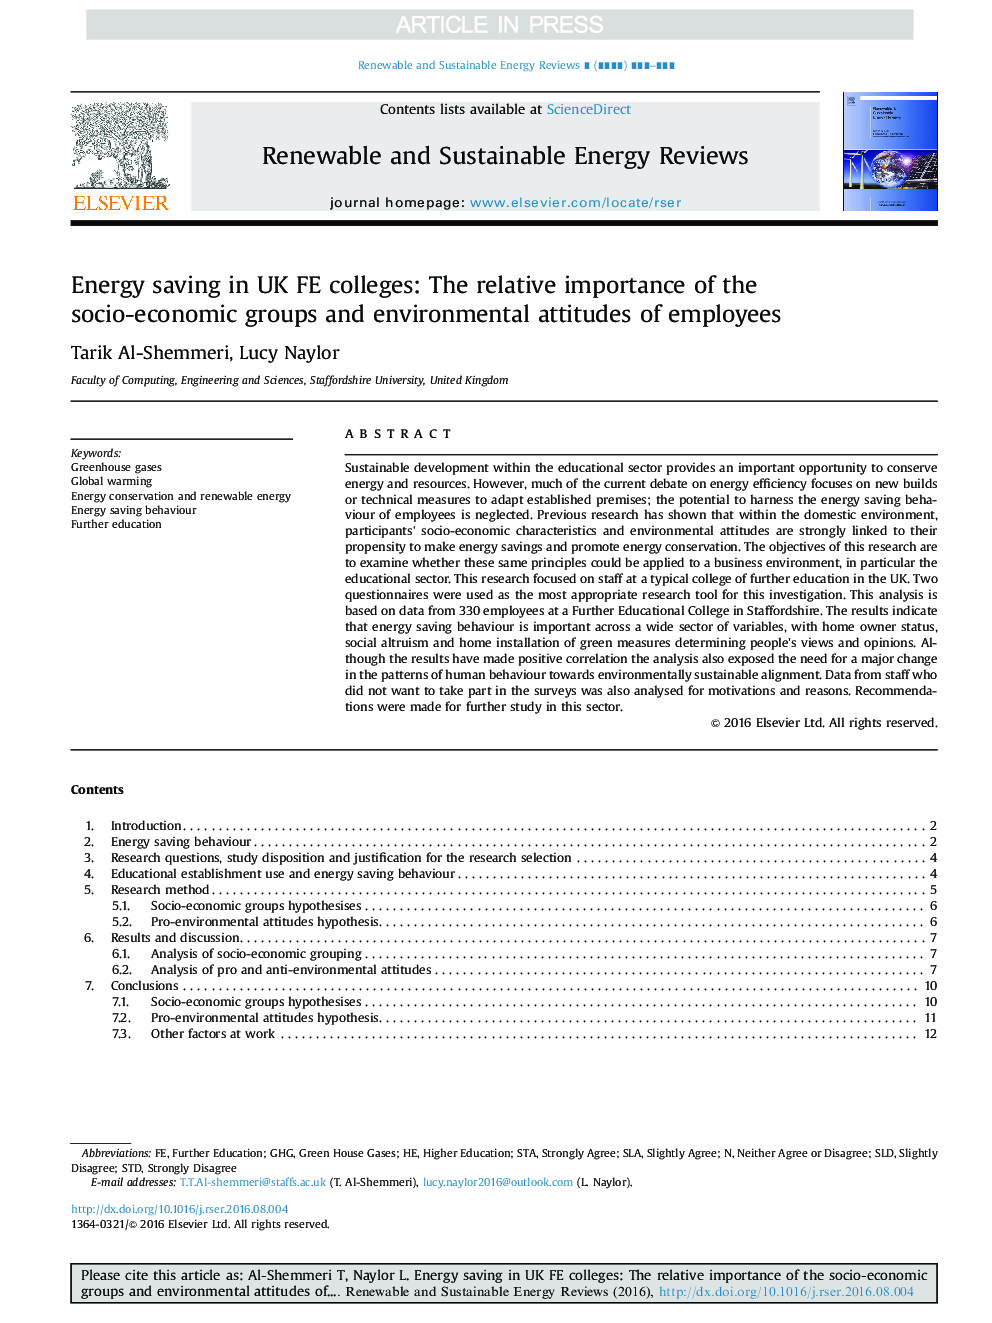 Energy saving in UK FE colleges: The relative importance of the socio-economic groups and environmental attitudes of employees